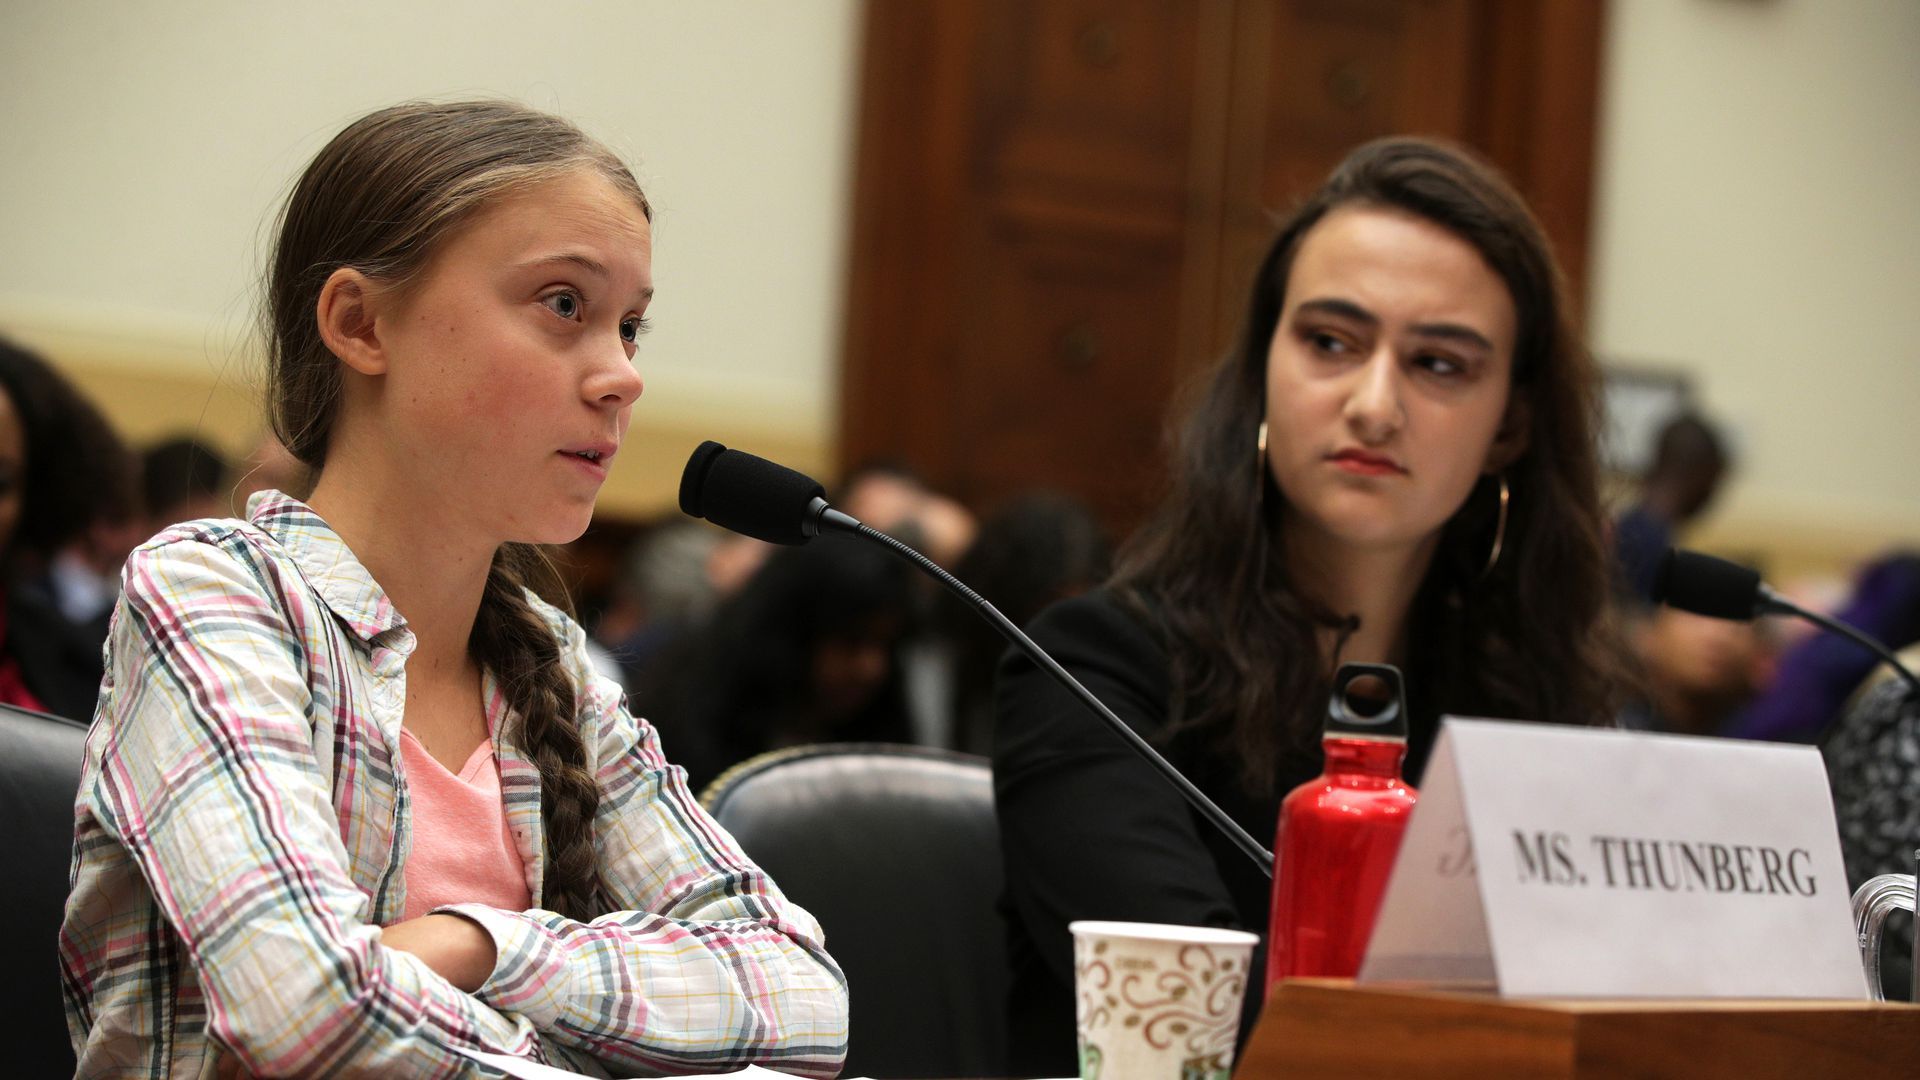 Greta Thunberg to Congress: "Listen to the scientists" on global warming - Axios